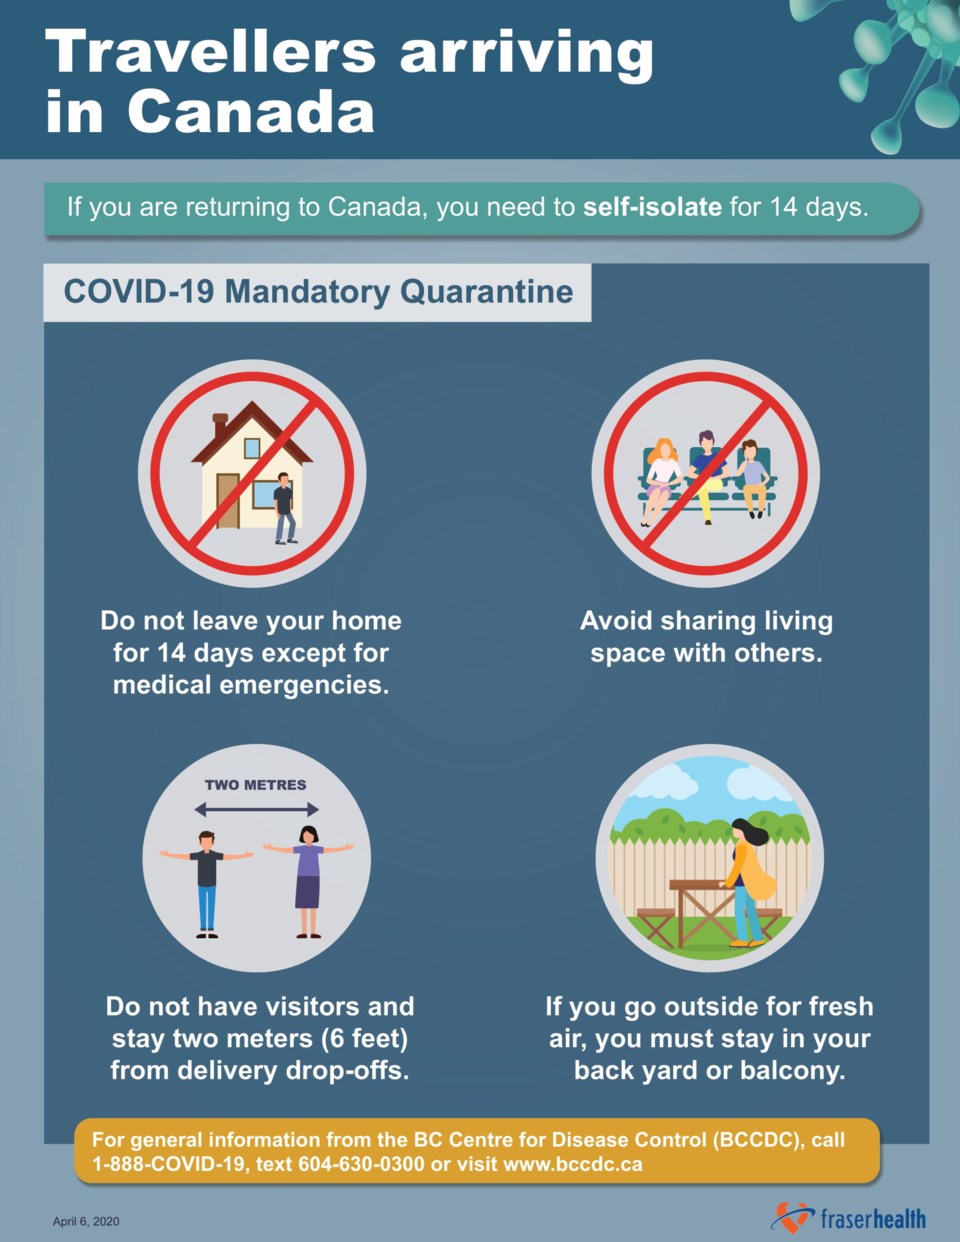 What mandatory quarantine means for travellers